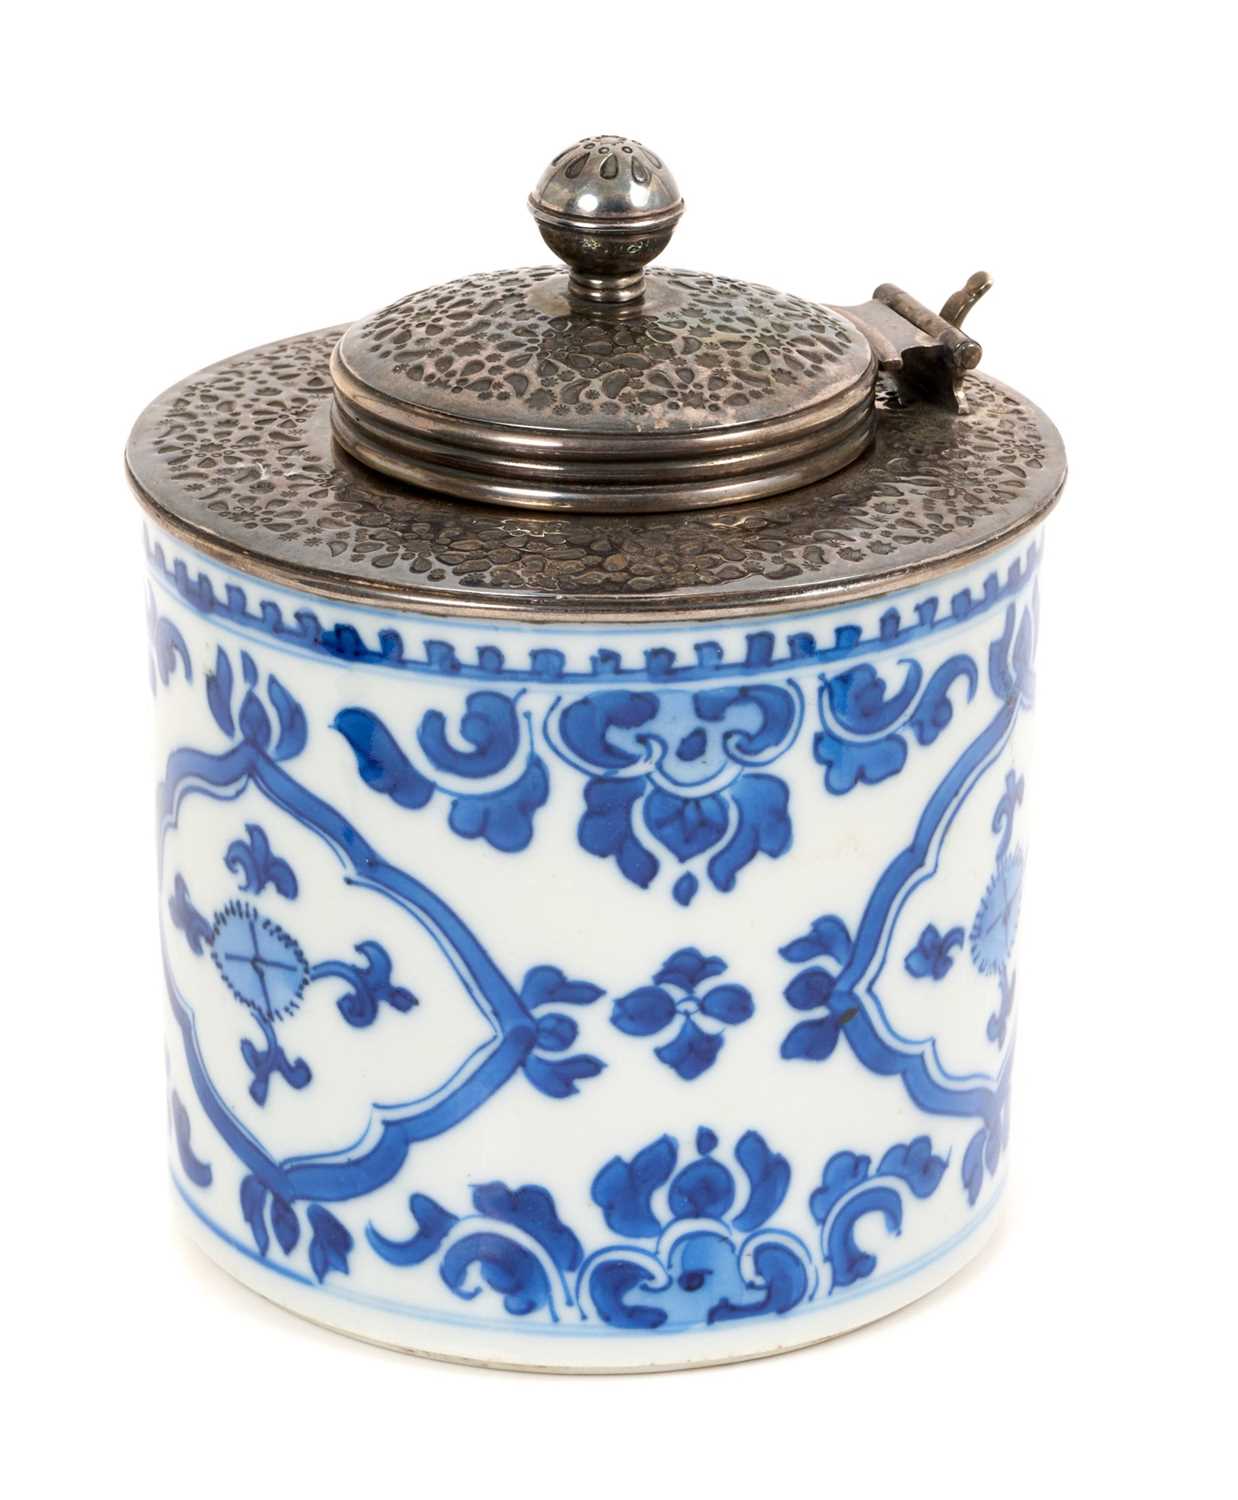 17th century Chinese blue and white porcelain pot converted to an inkwell - Image 2 of 6